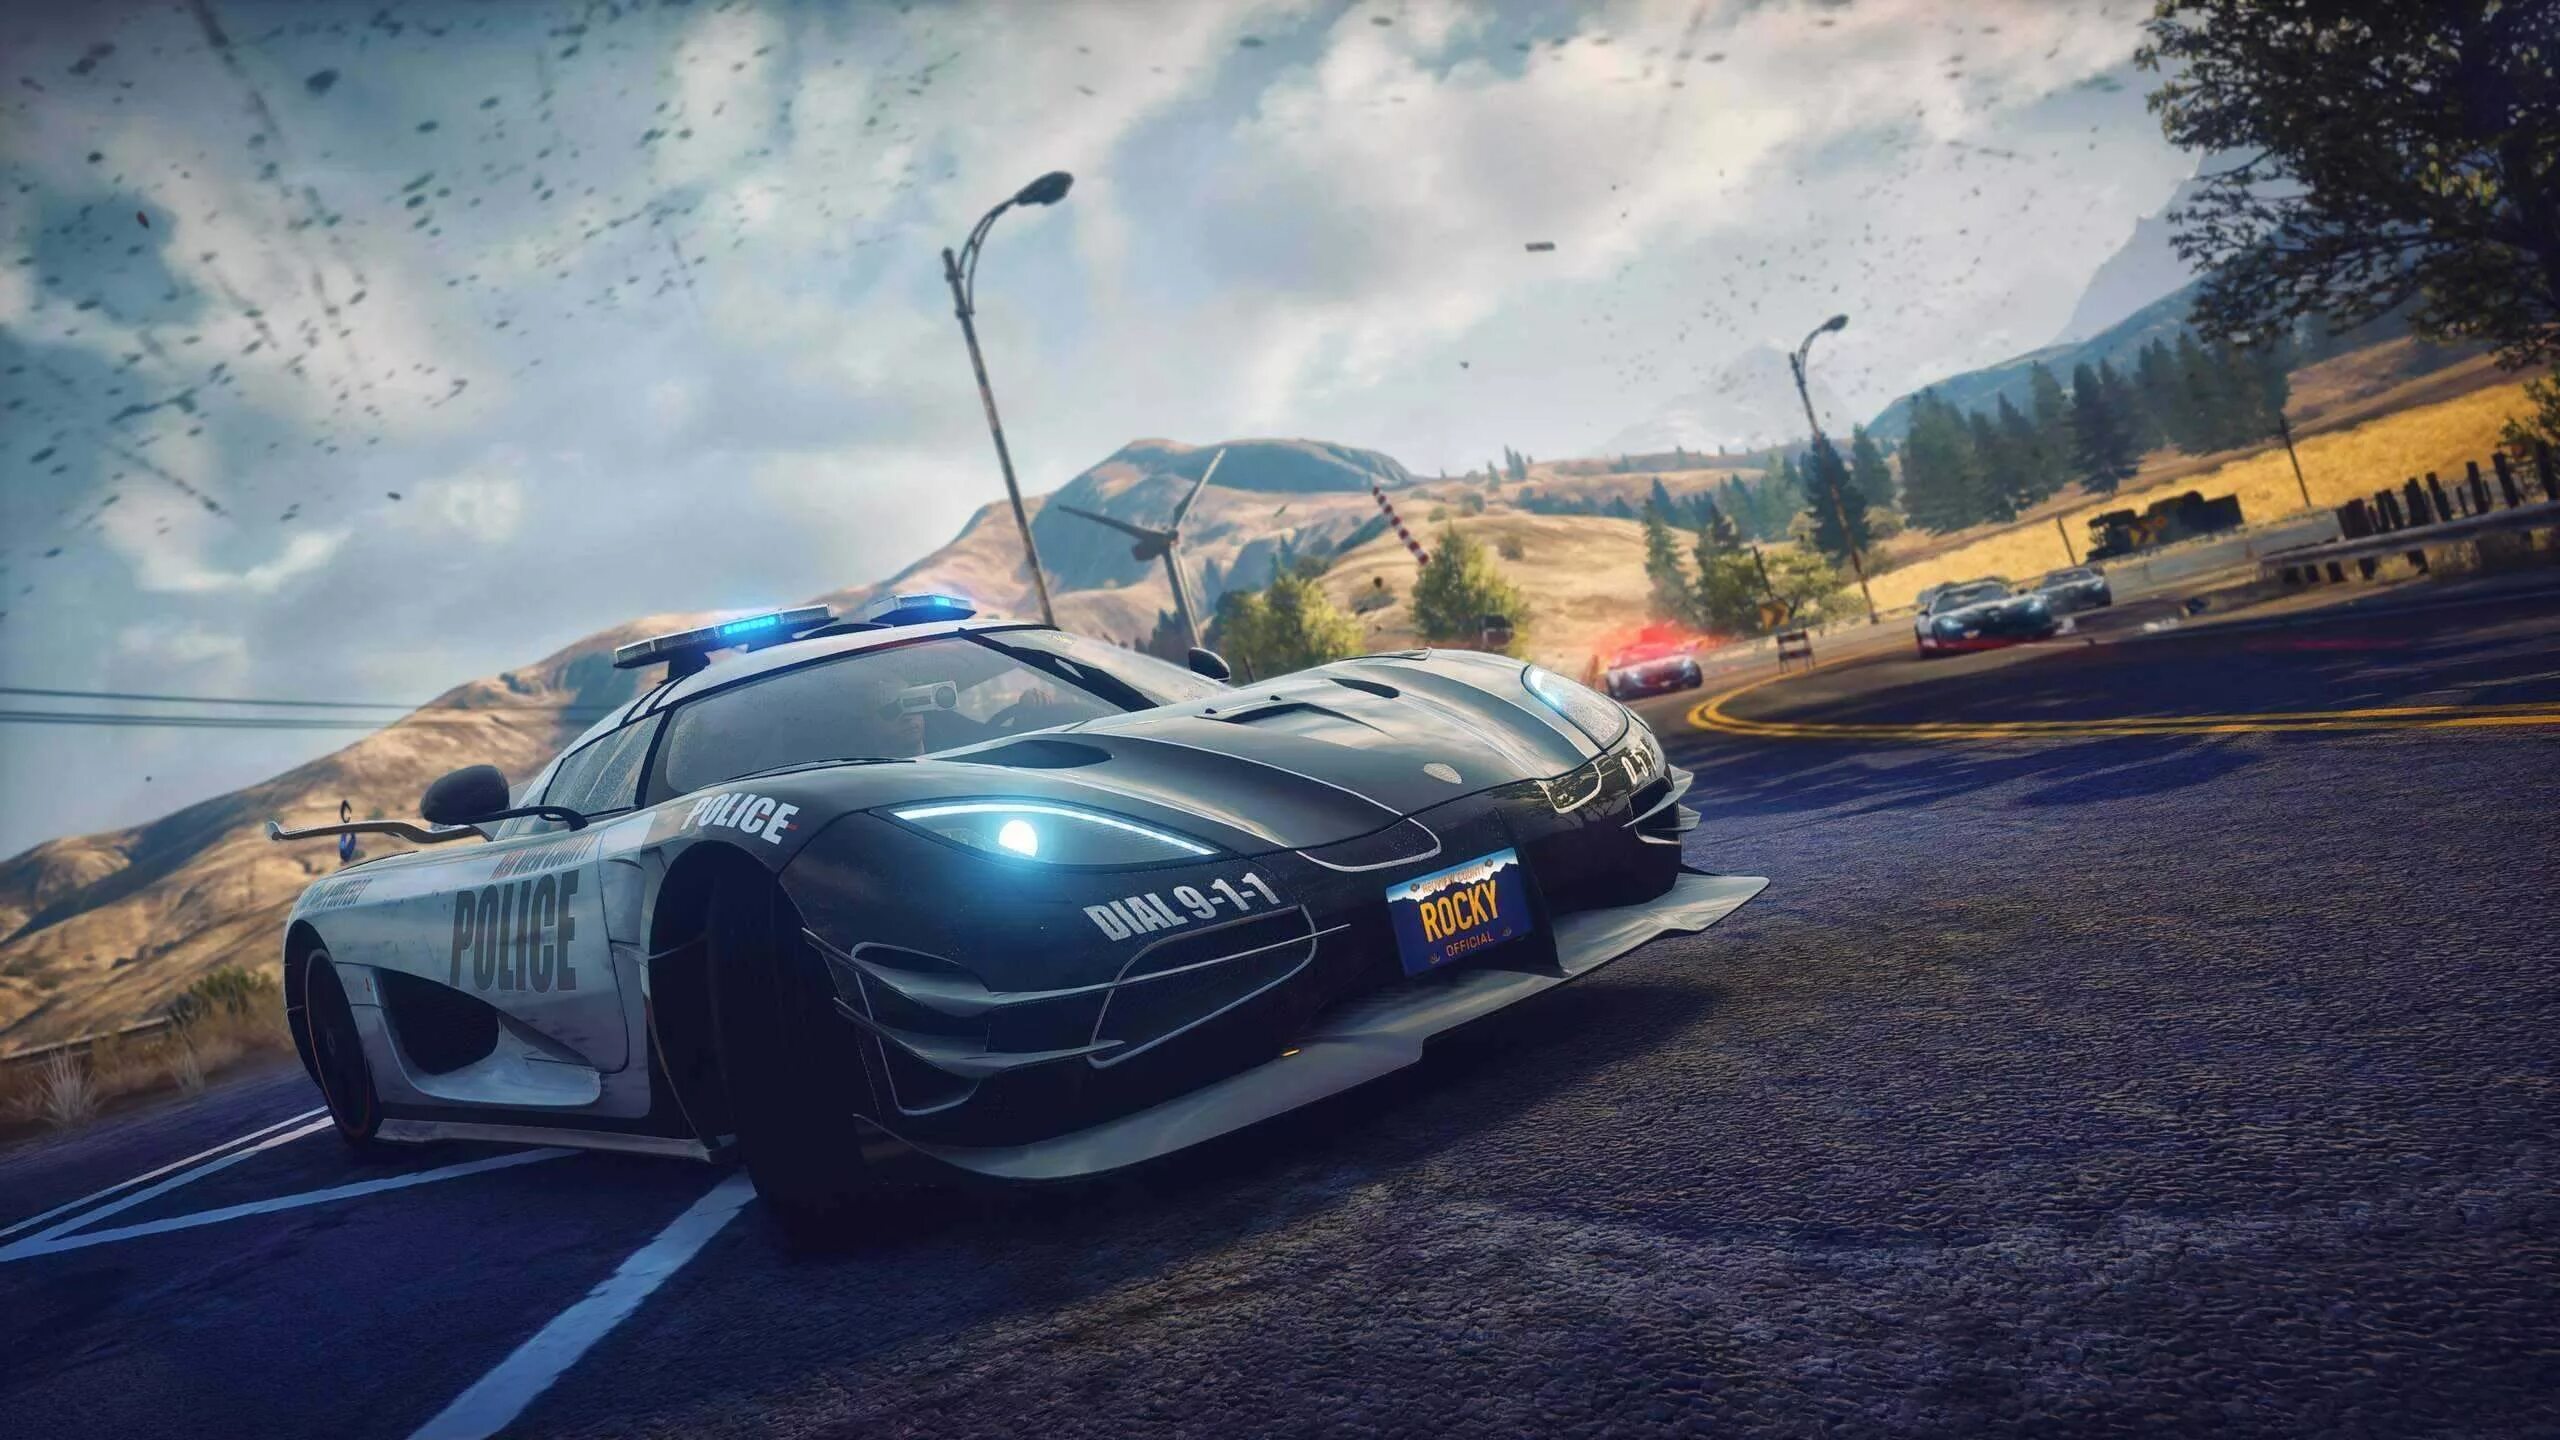 Нидфорспид. Need for Speed Rivals. Need for Speed ривалс. Rivals, NFS 2015.